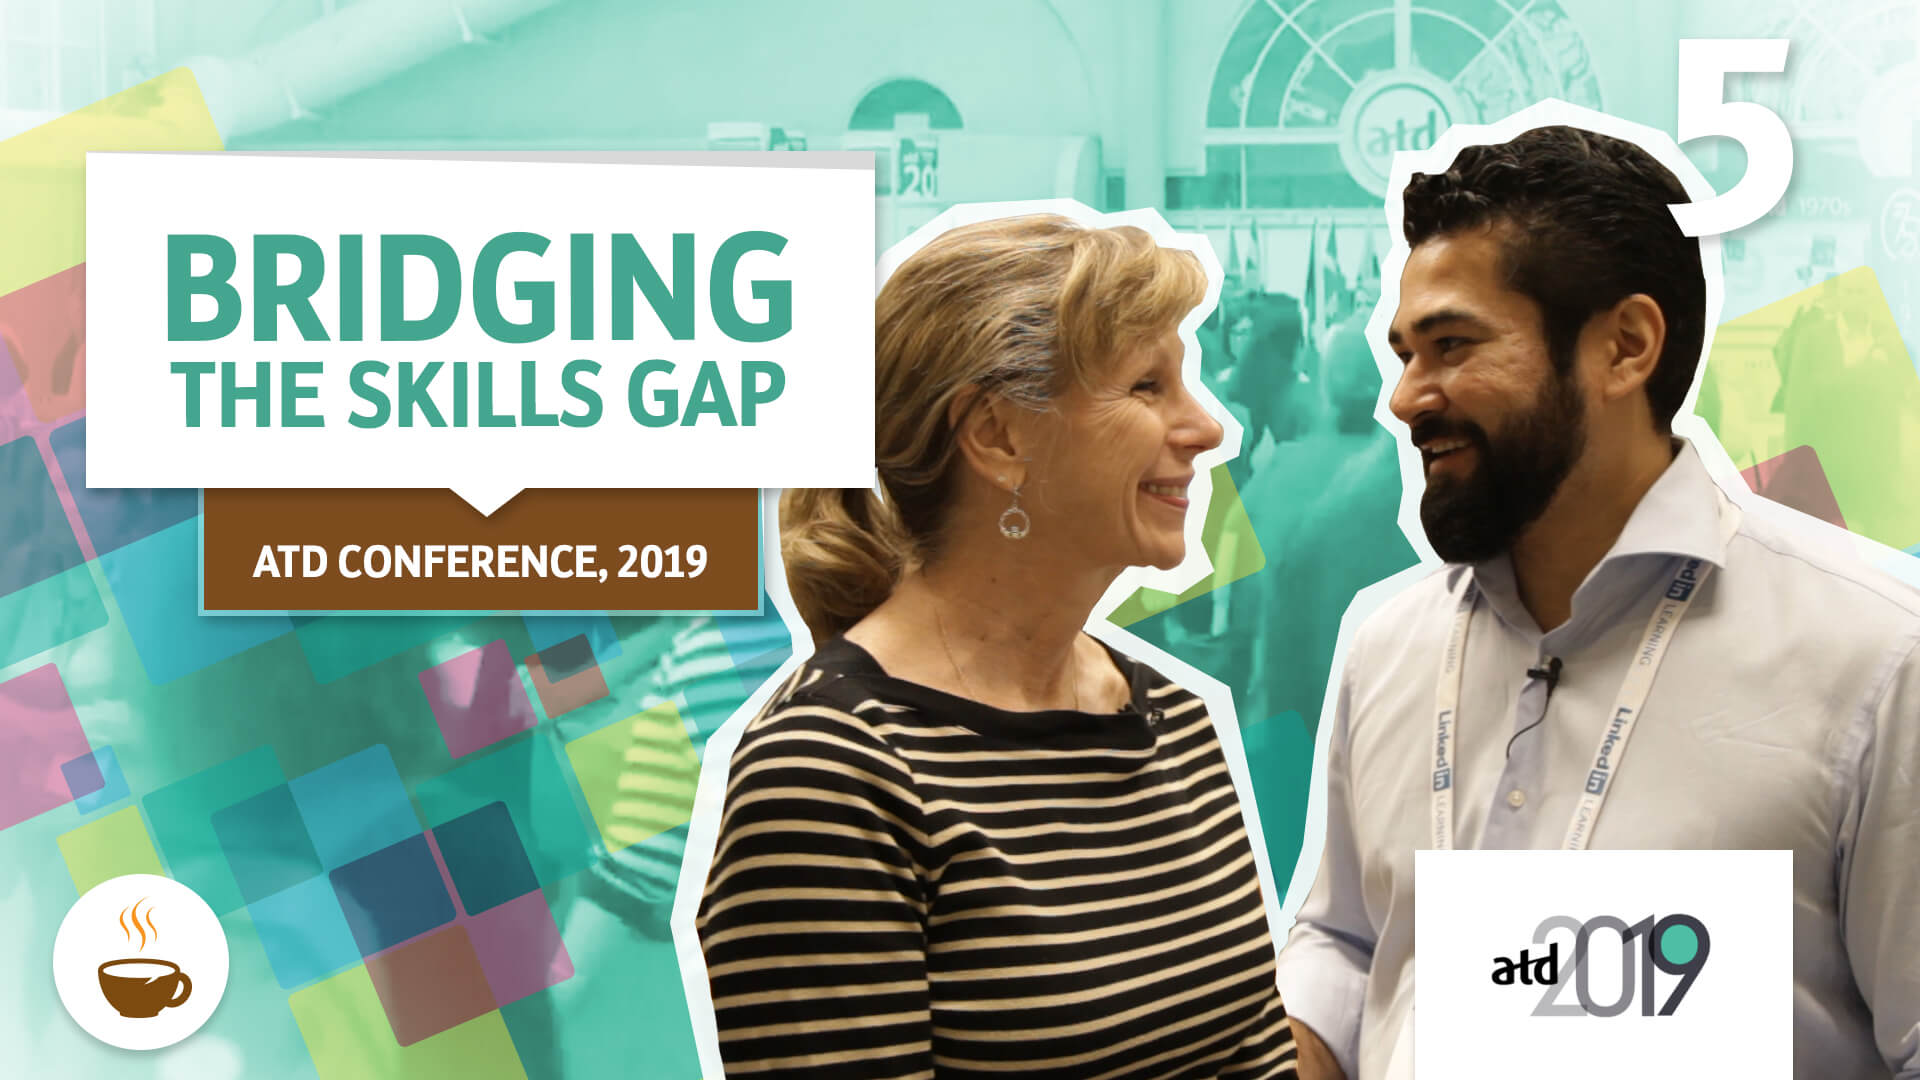 Wagner Cassimiro interviews Kristen about Bridging the Skills Gap - ATD Conference, 2019 